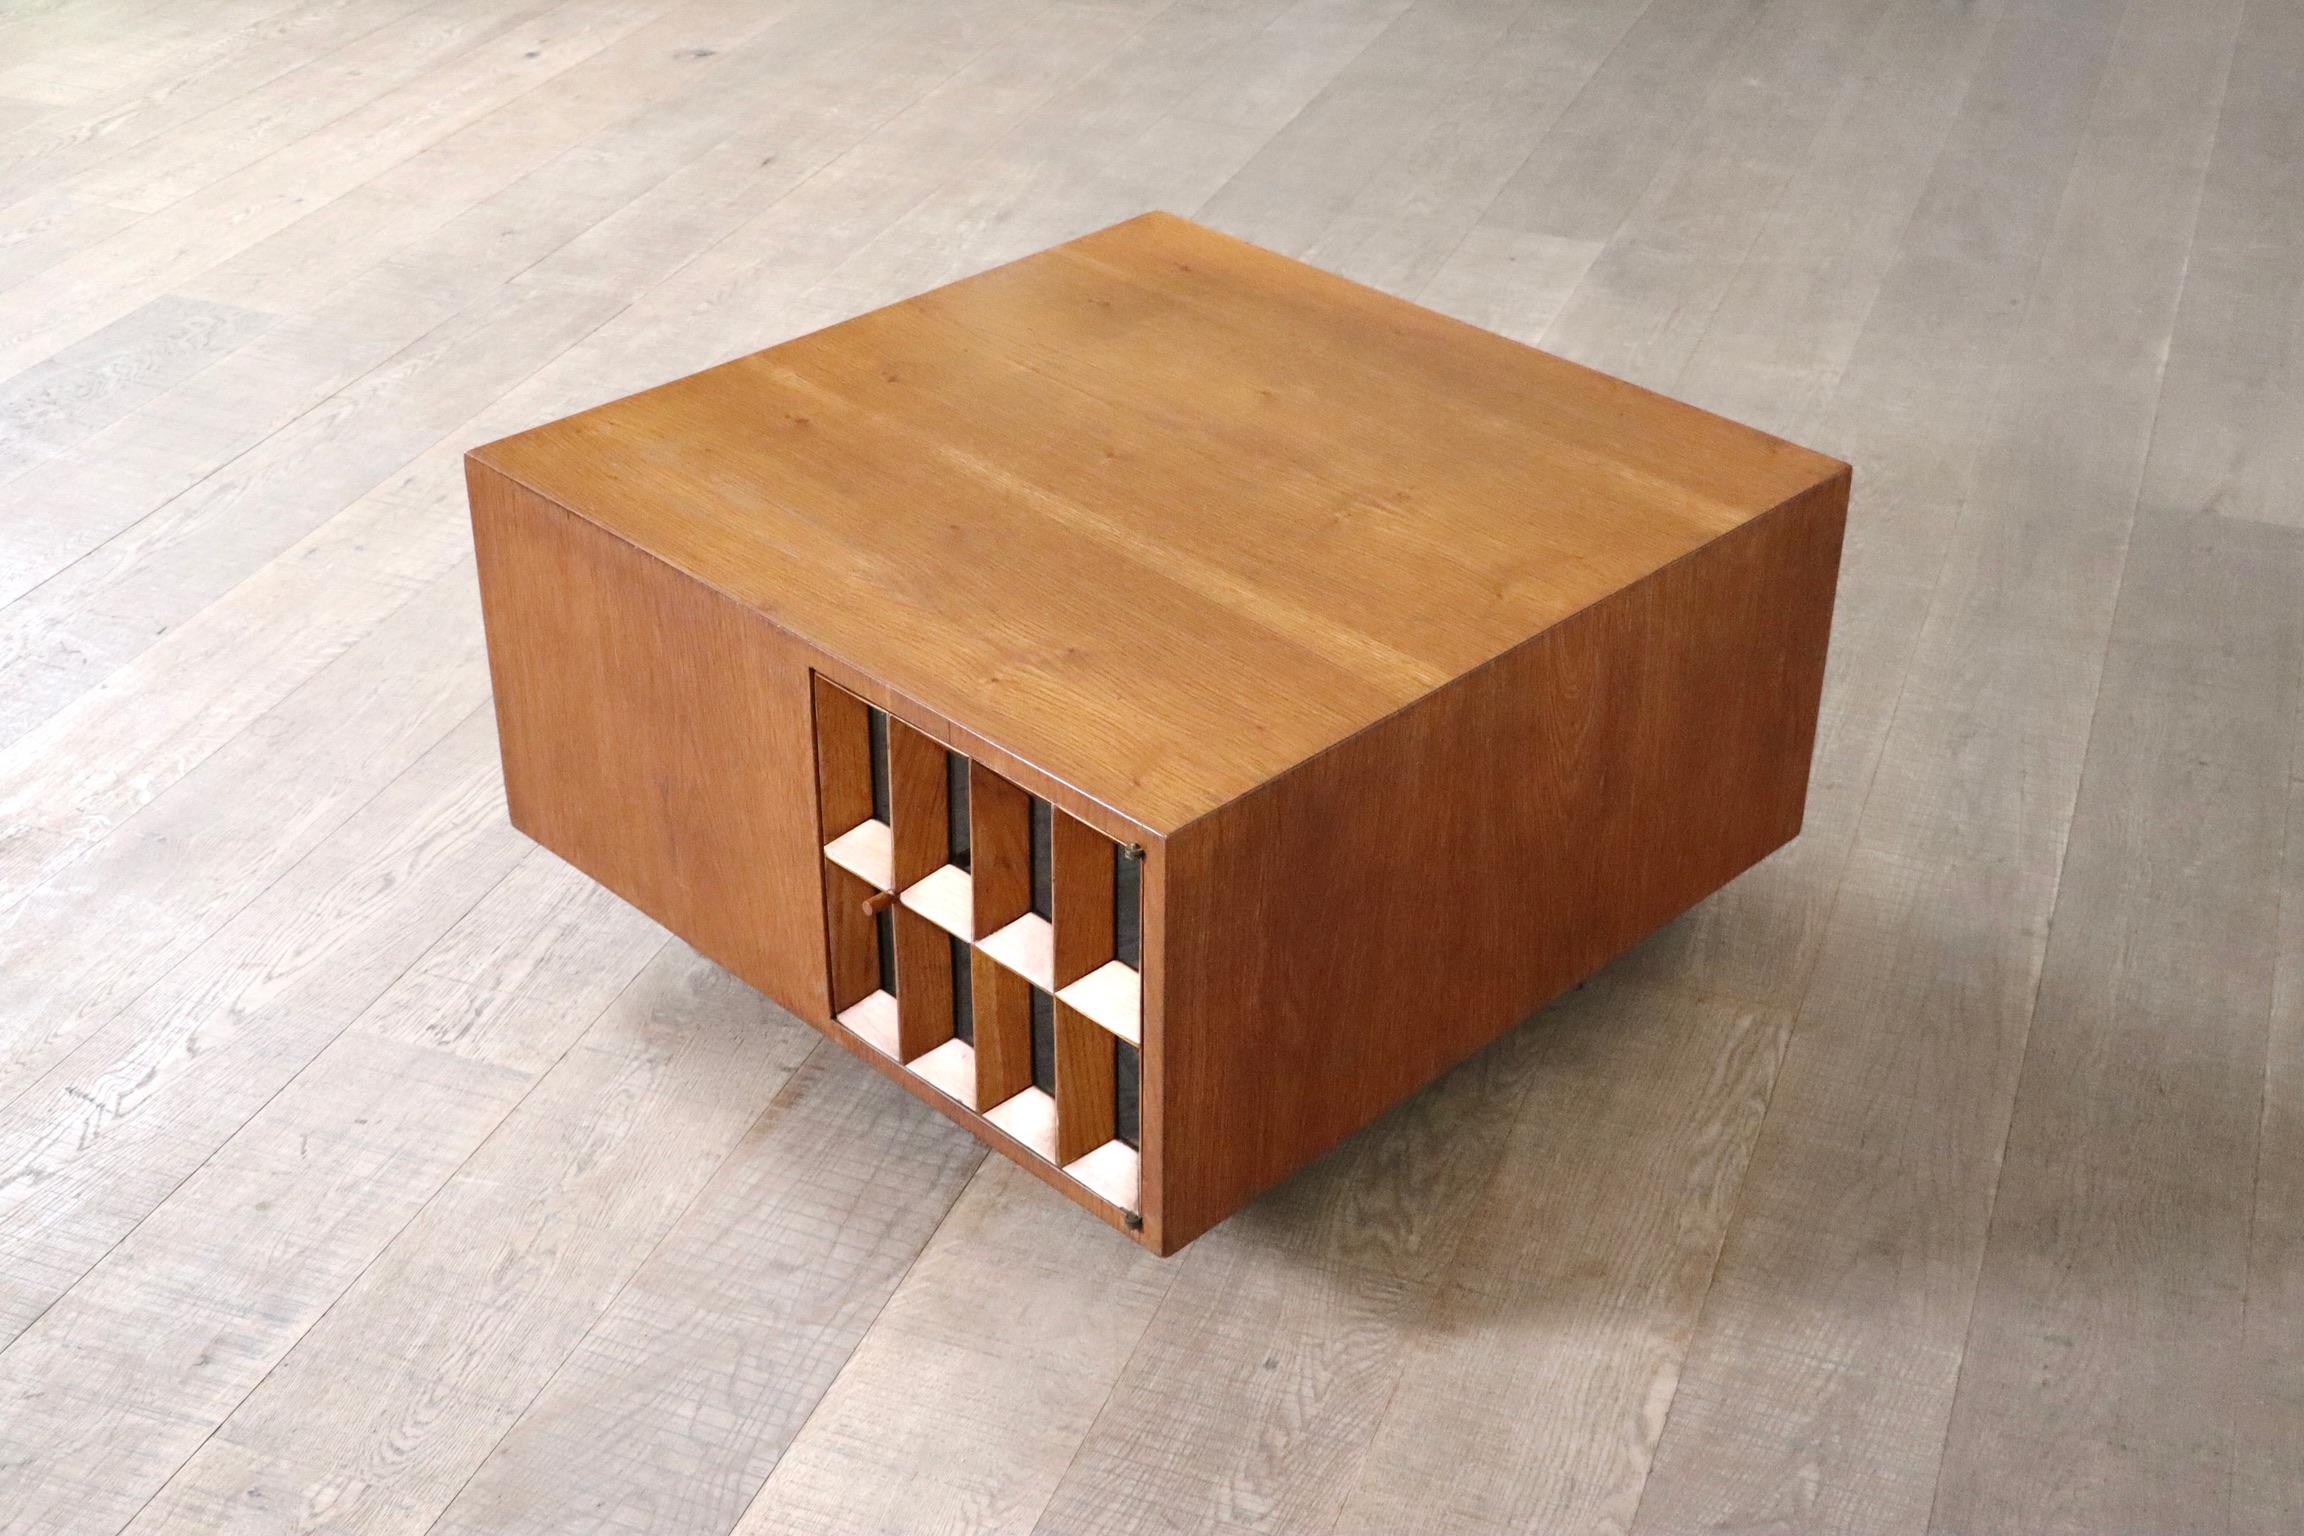 Giuseppe Rivadossi Coffee Table In Oak With Glass Framed Doors, Italy 1975 For Sale 5